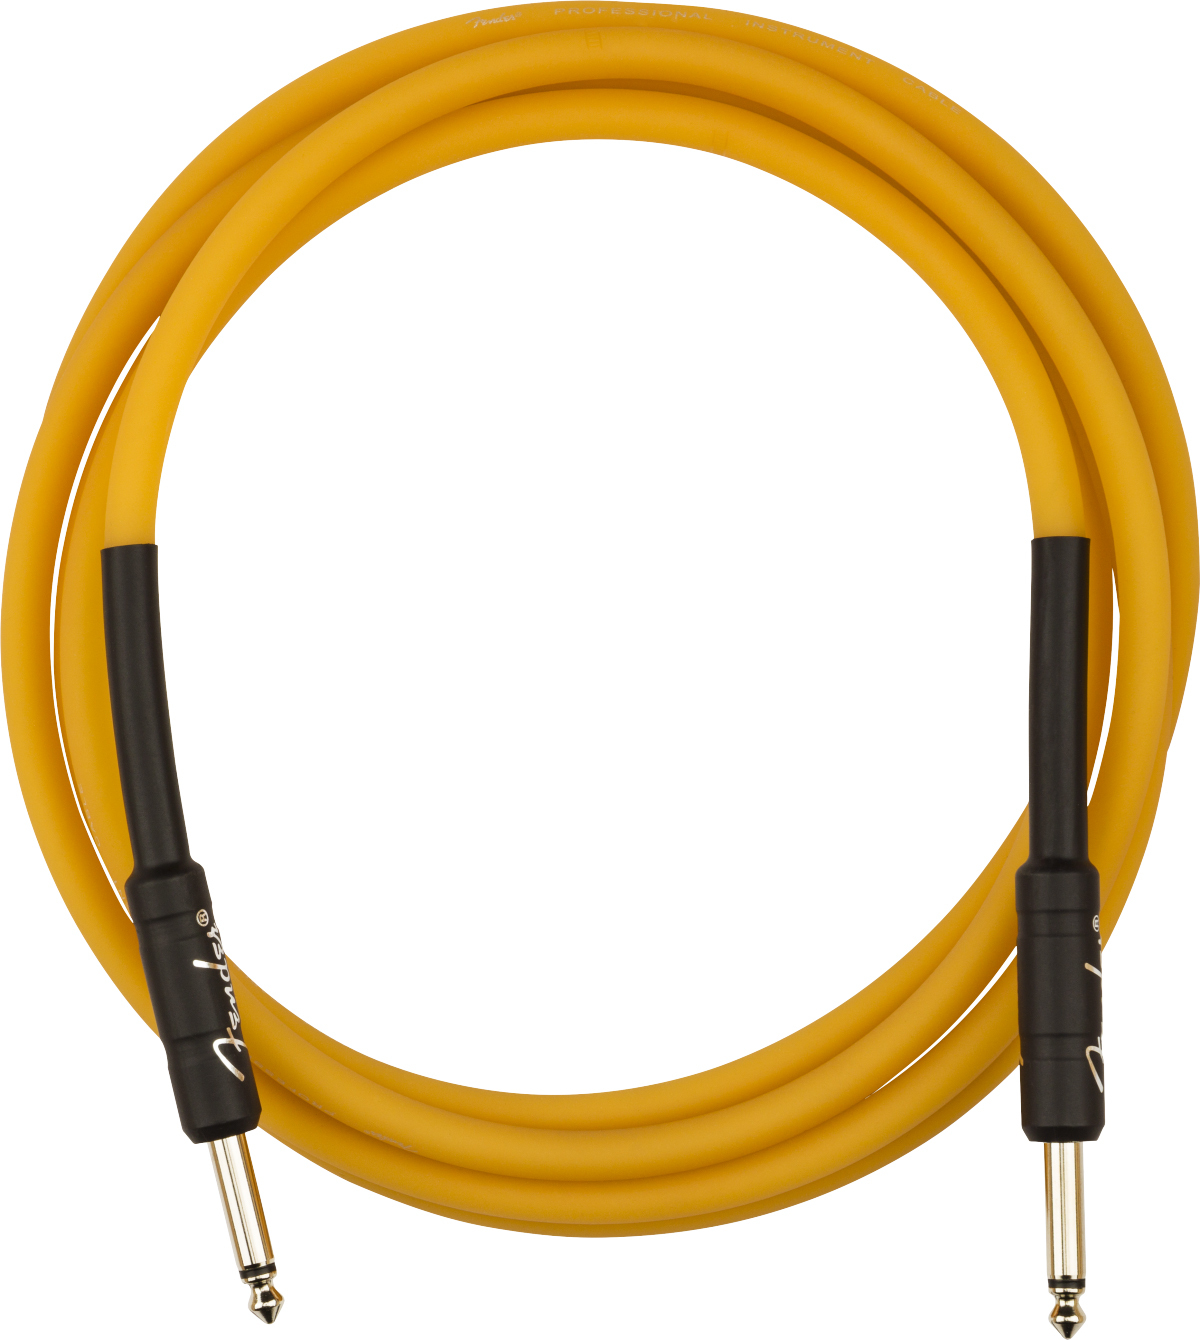 Fender Pro Glow In The Dark Instrument Cable Droit/droit 10ft Orange - Cable - Main picture